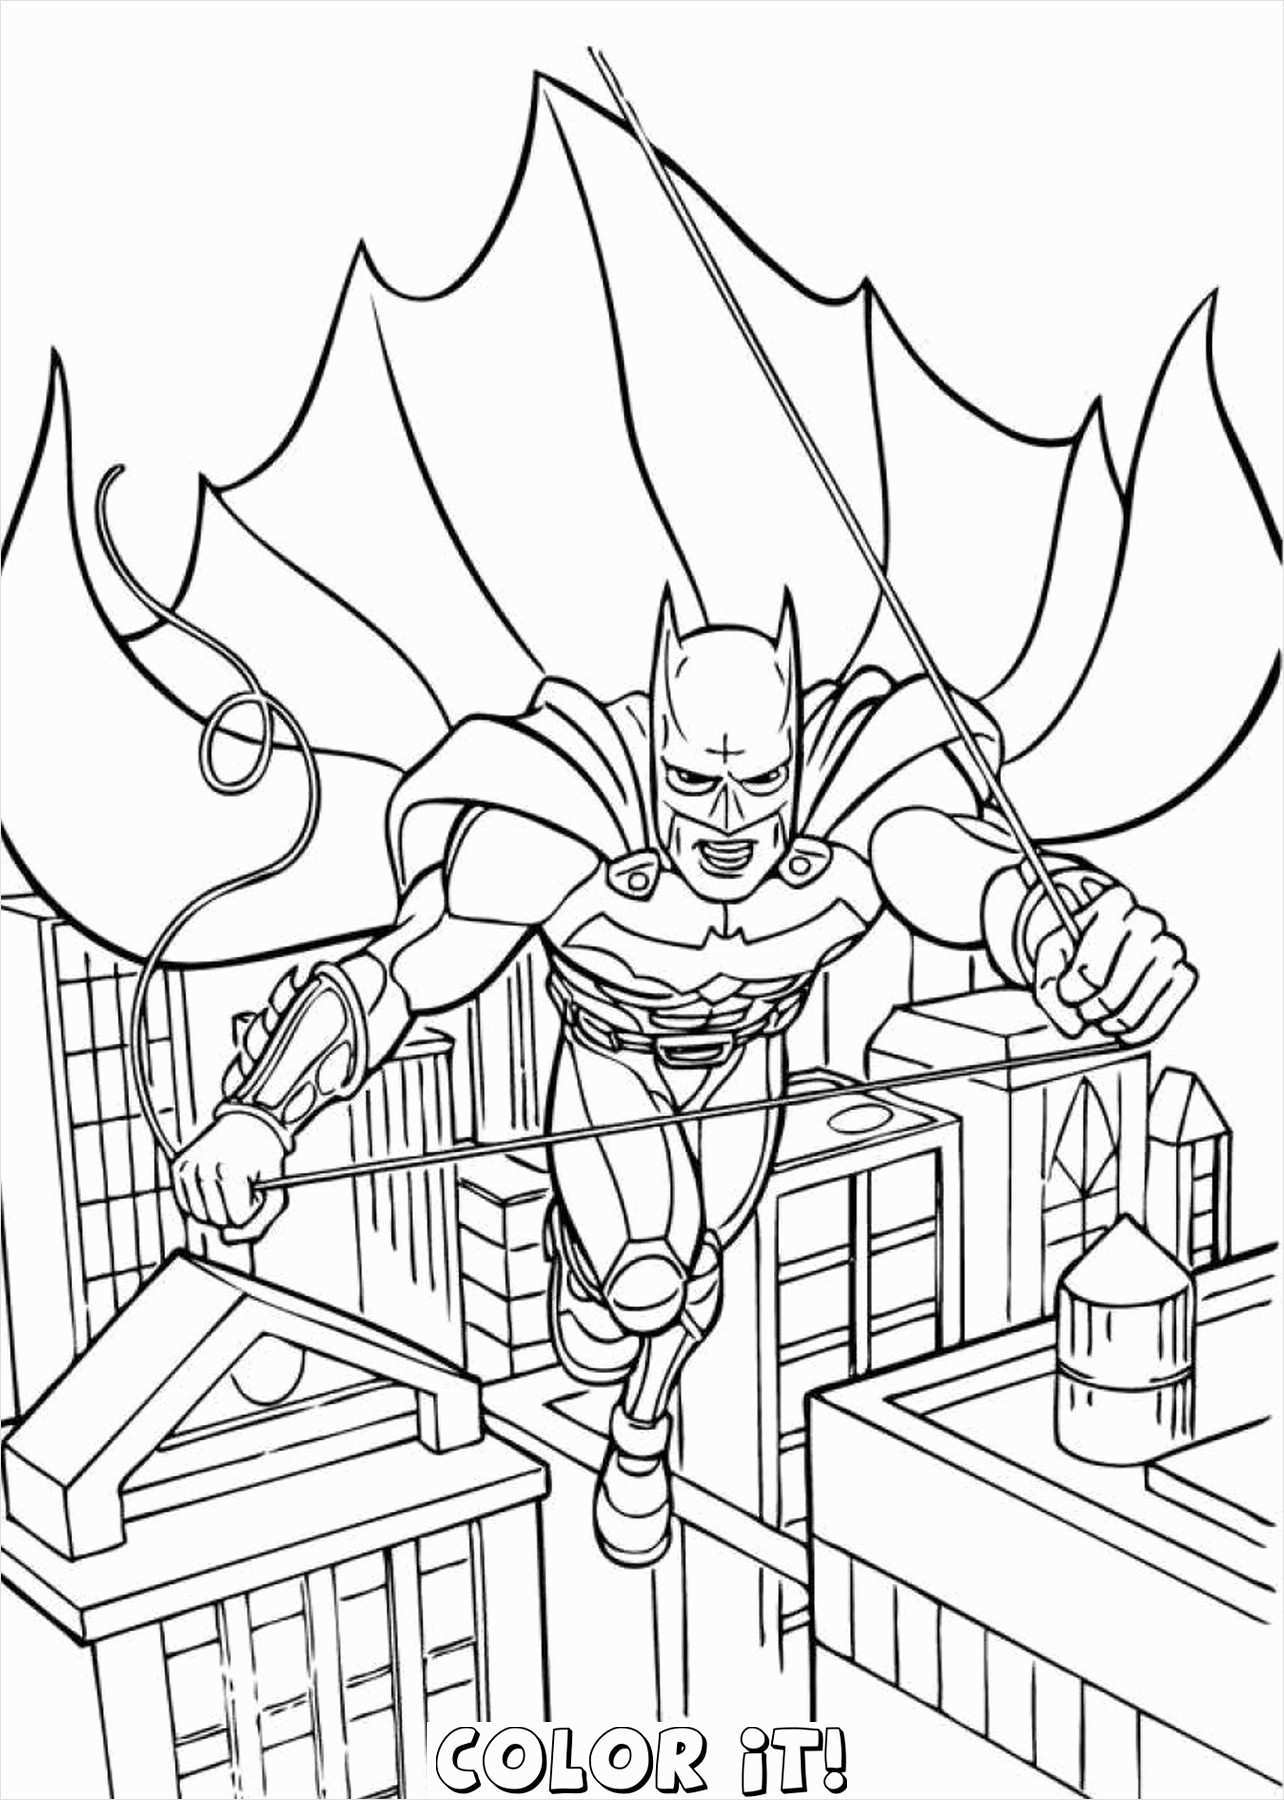 Batman Drawing Pages at PaintingValley.com | Explore collection of ...